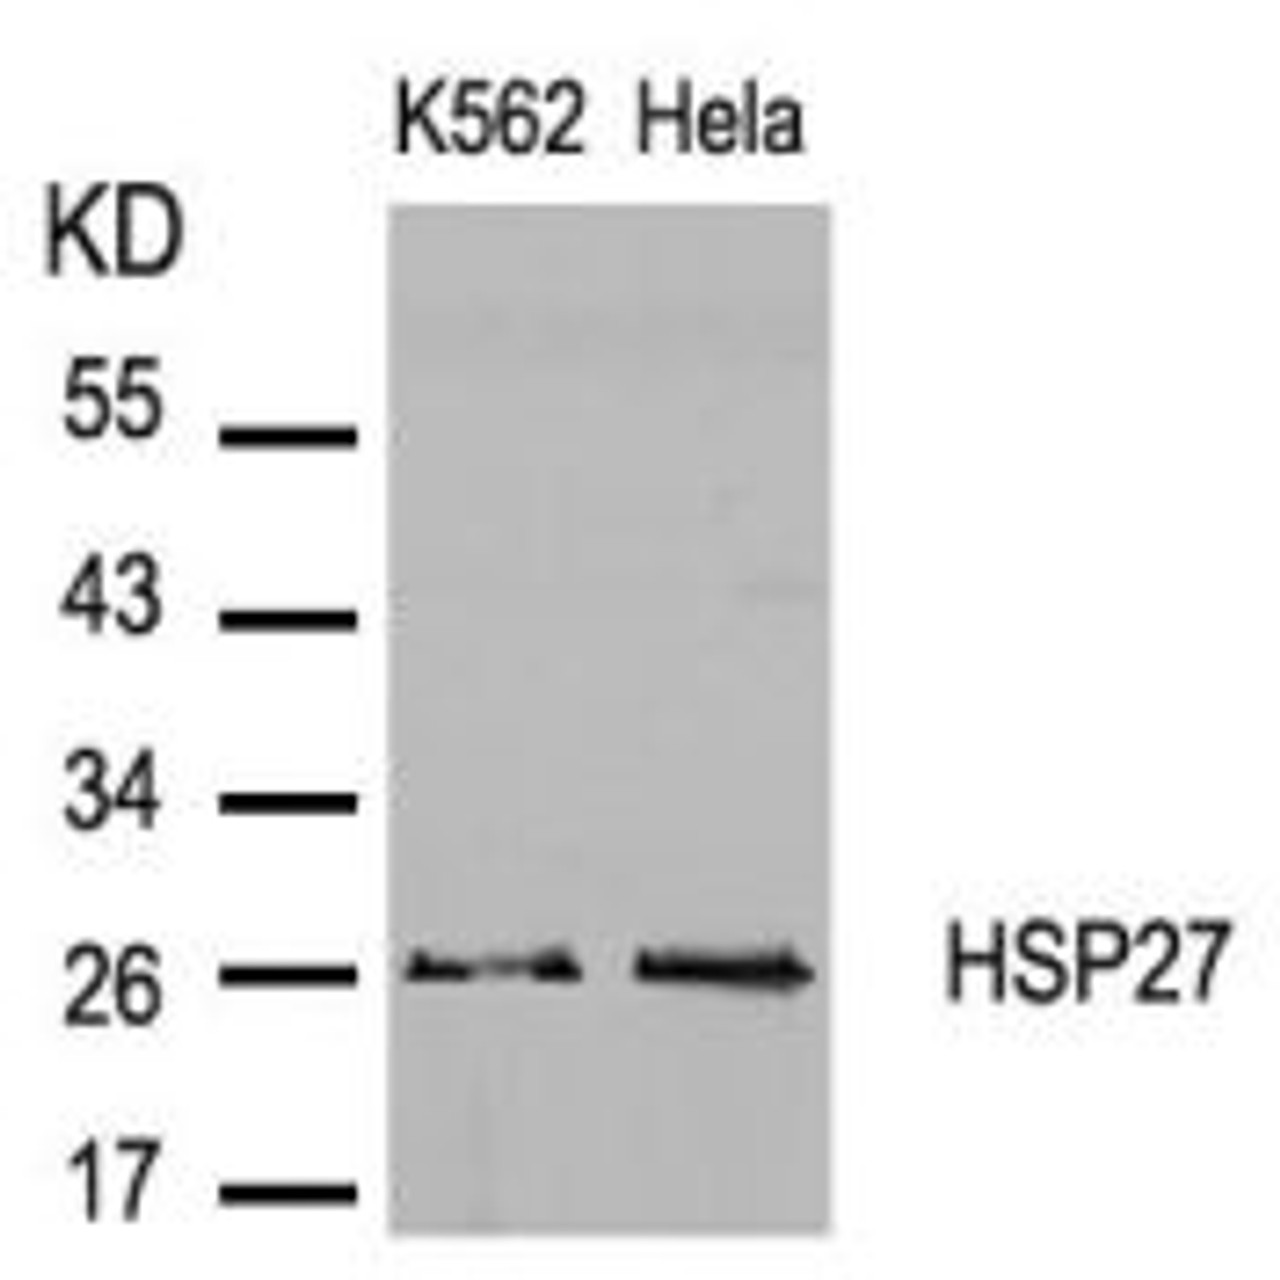 Western blot analysis of lysed extracts from K562 and HeLa cells using HSP27 (Ab-82) .